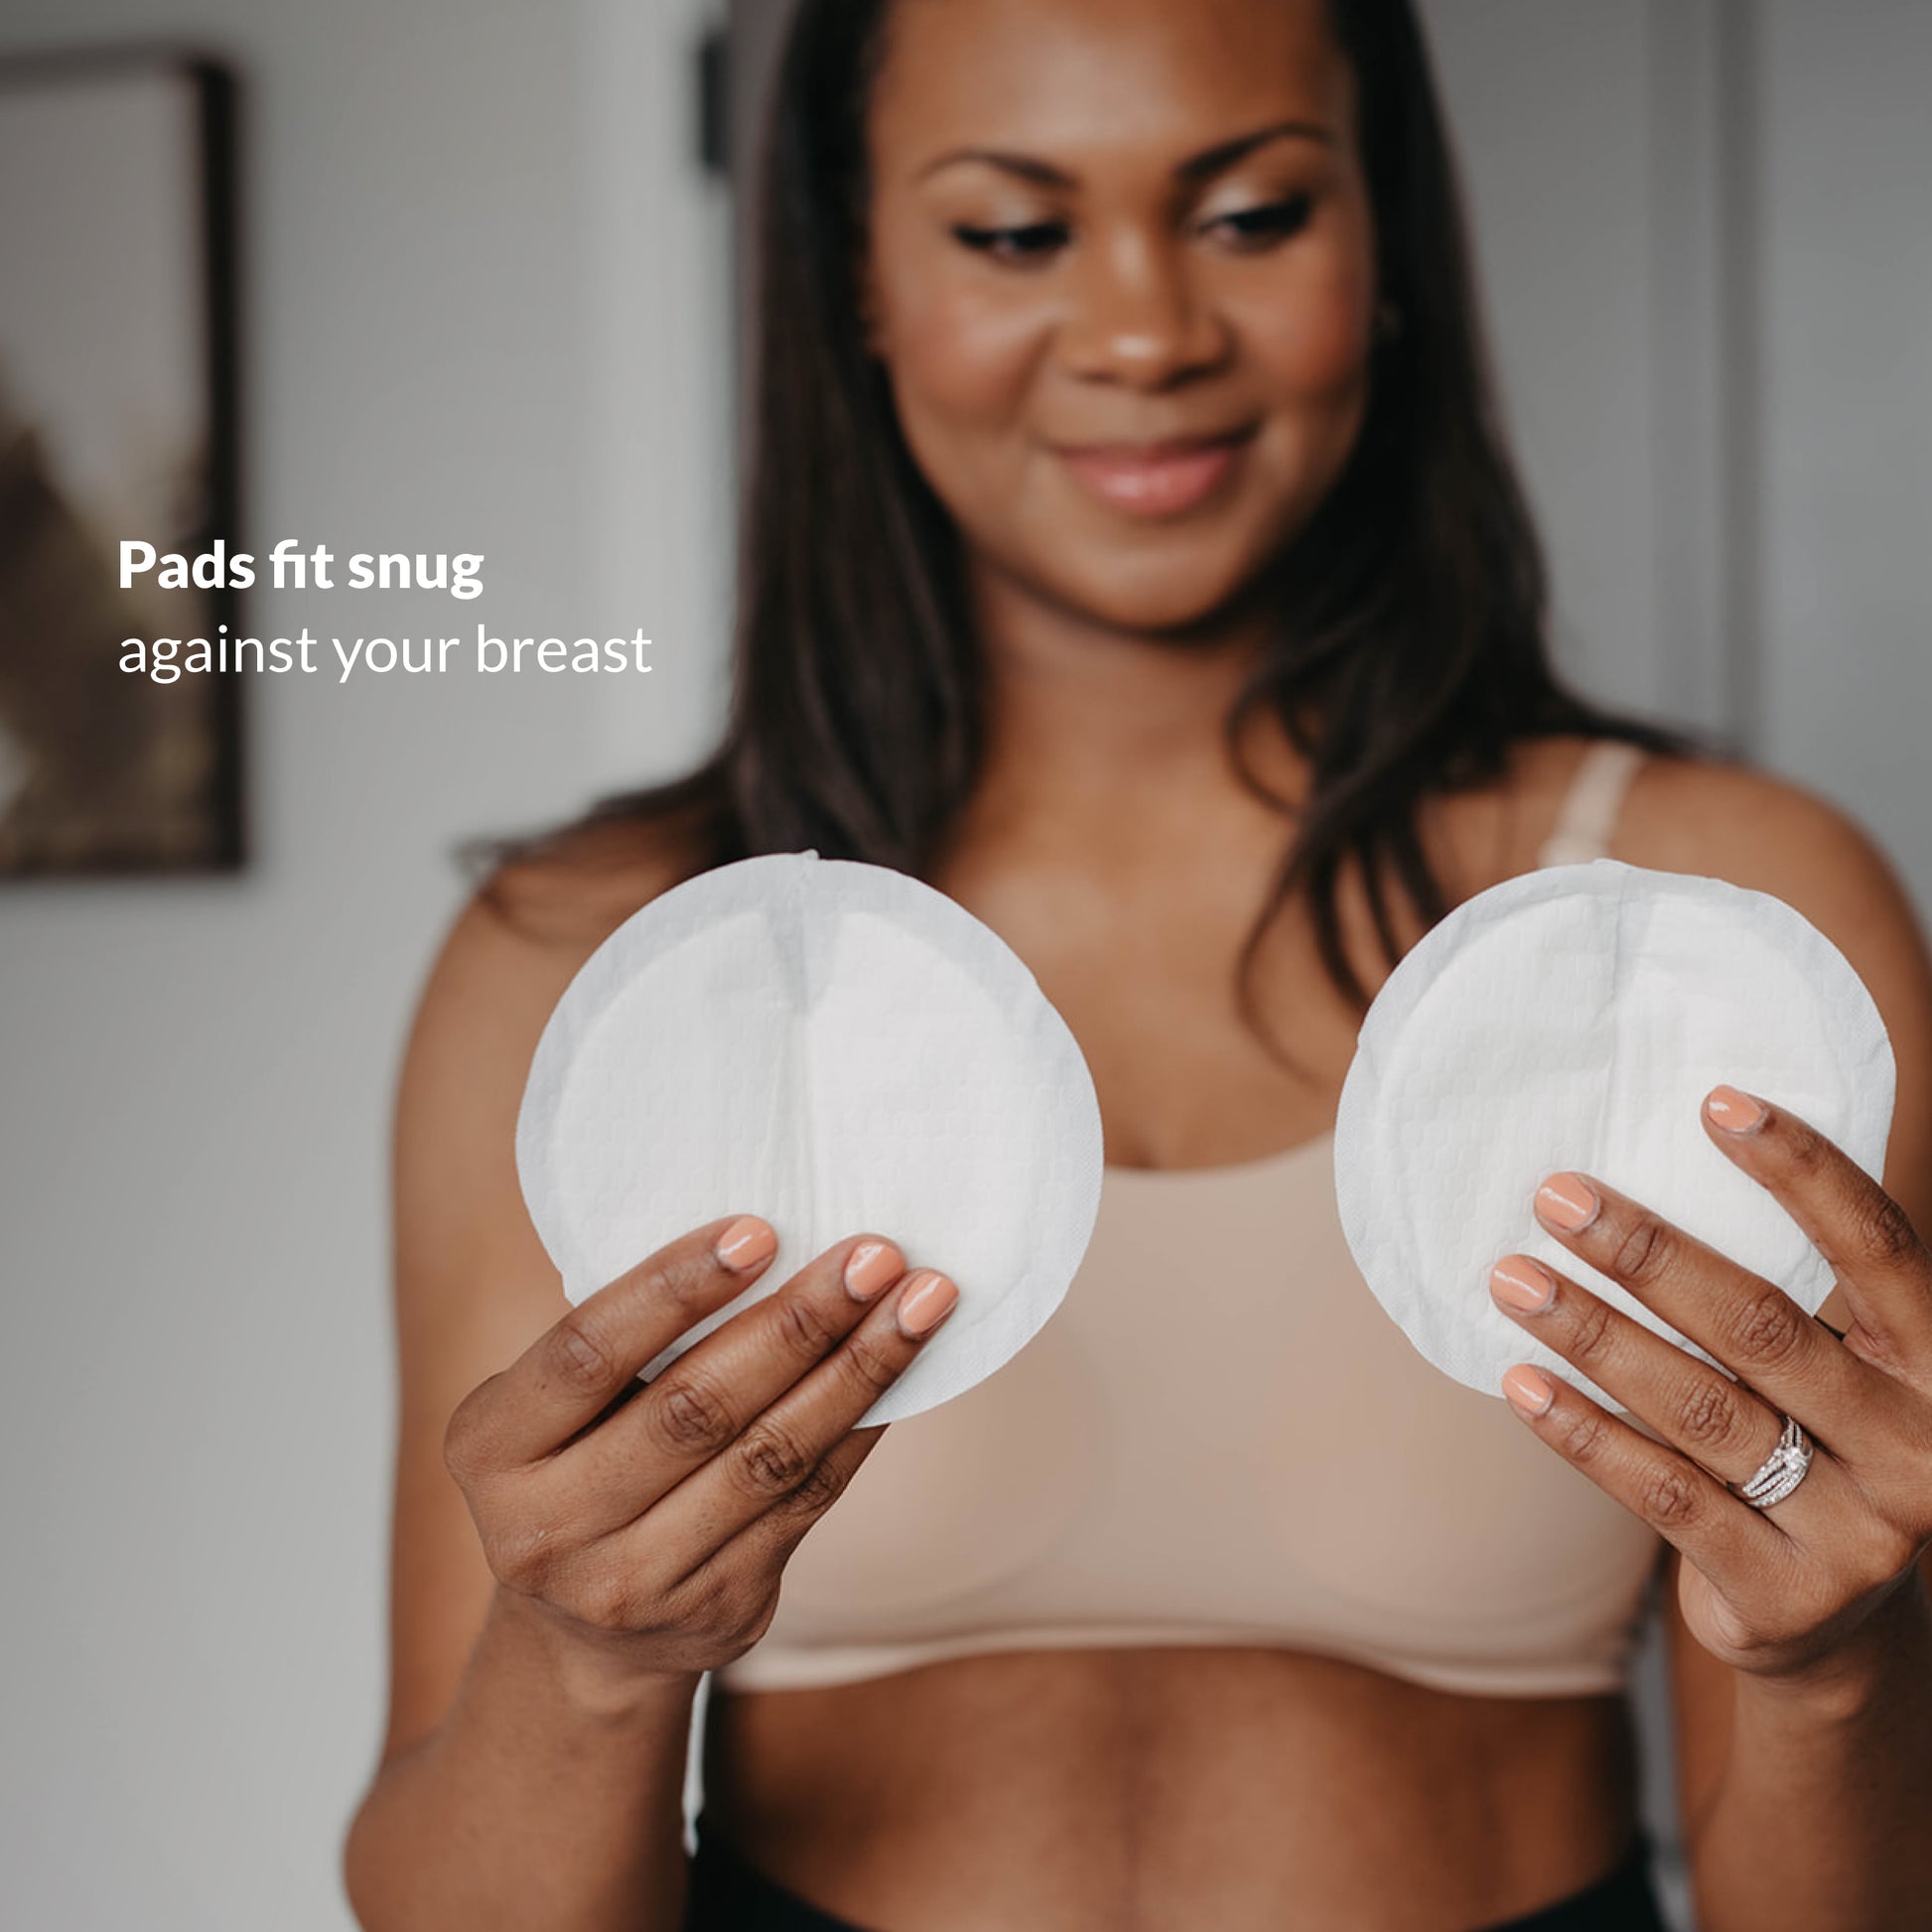 Kiinde Expression Disposable Breast Pad, to Promote Lactation and Soothe - 40 Pack